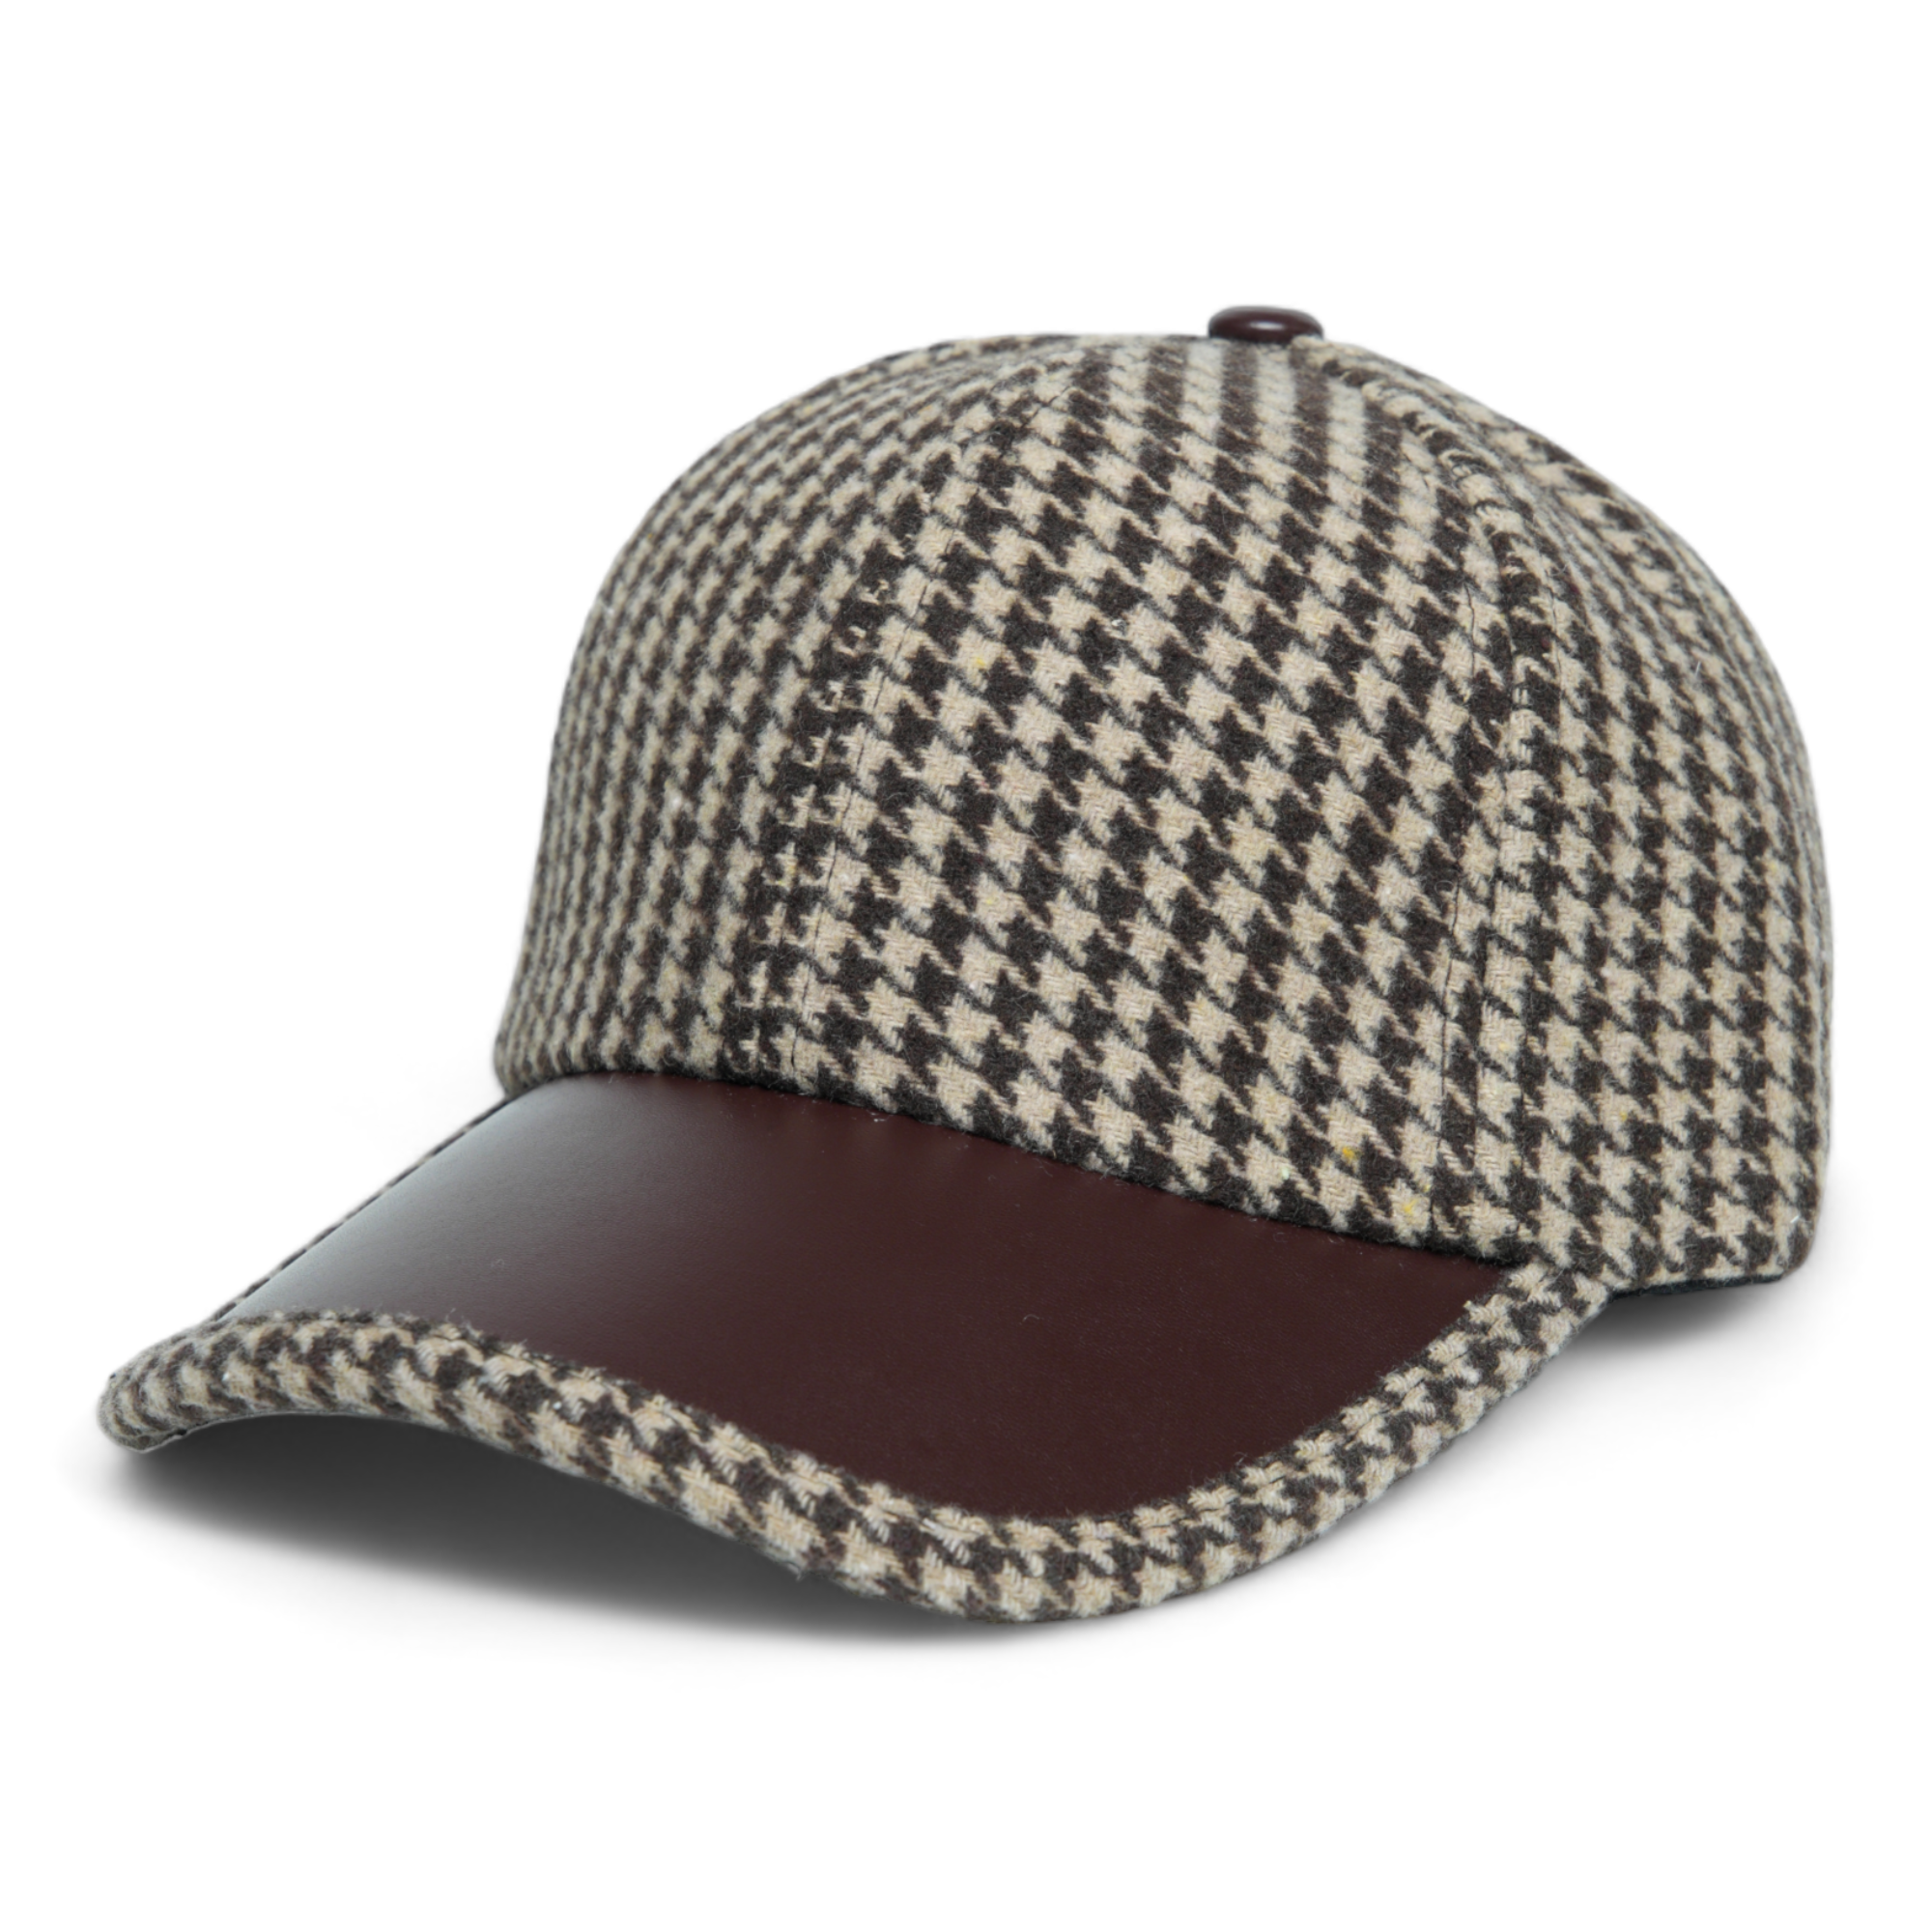 Chokore Retro Houndstooth Pattern Baseball Cap with Leather Details (Coffee)